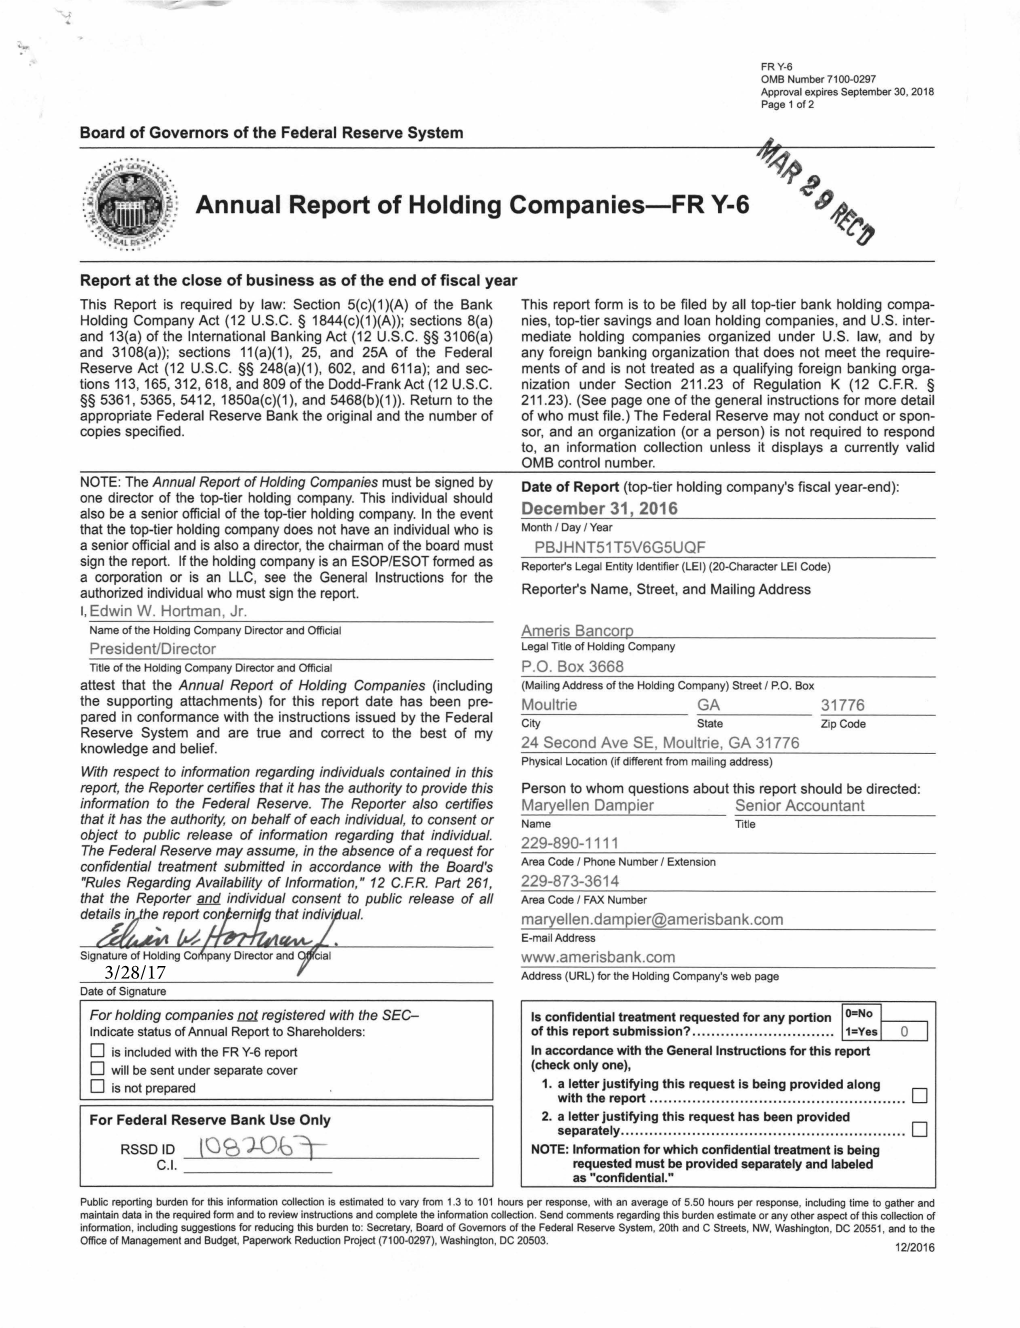 Annual Report of Holding Companies